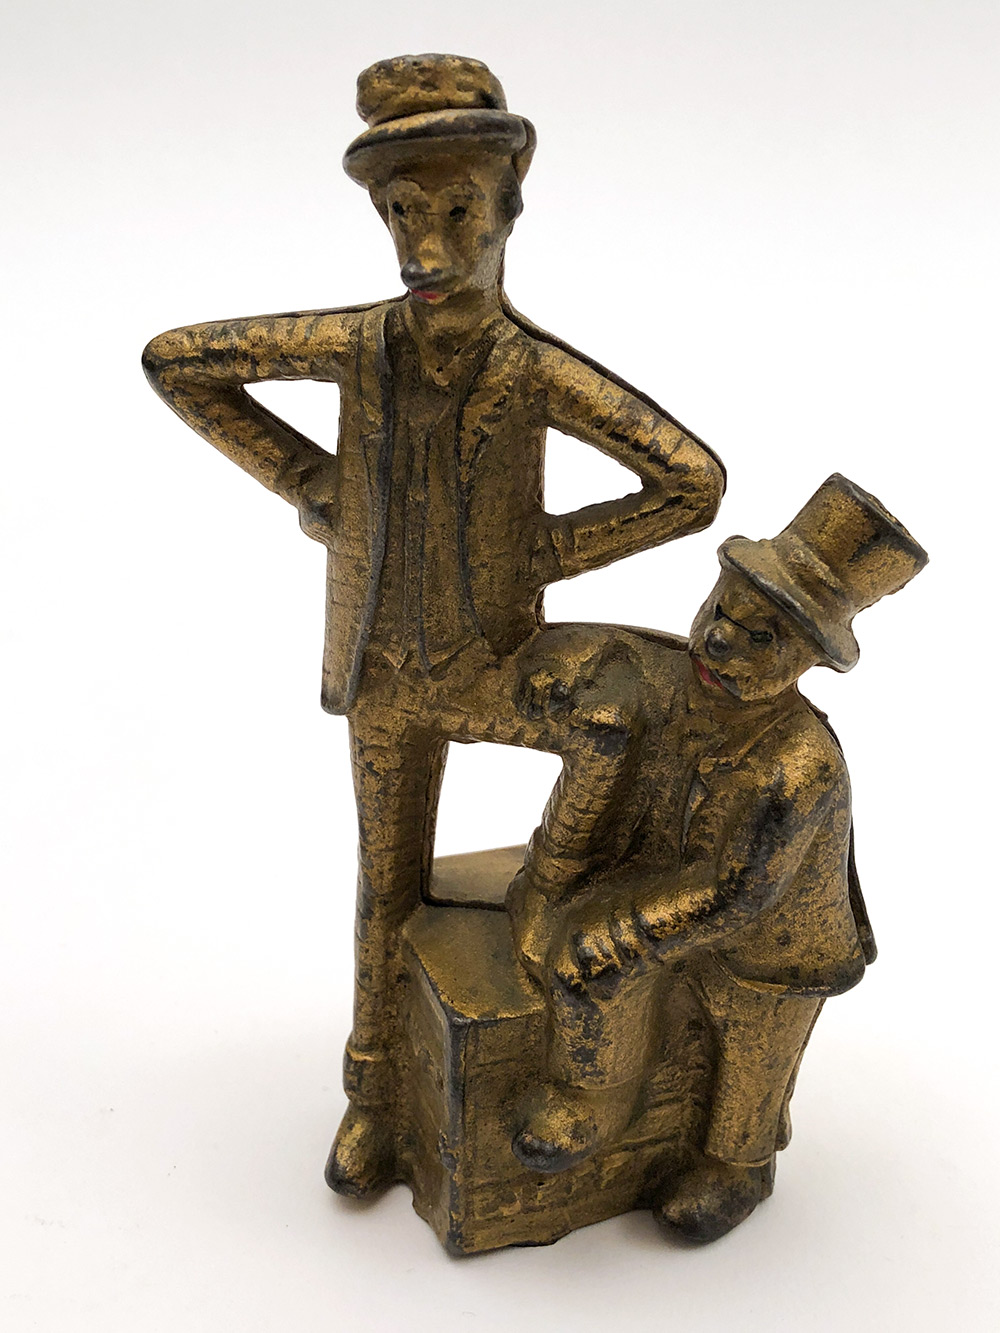 Original Cast Iron Mutt and Jeff Penny Bank For Sale